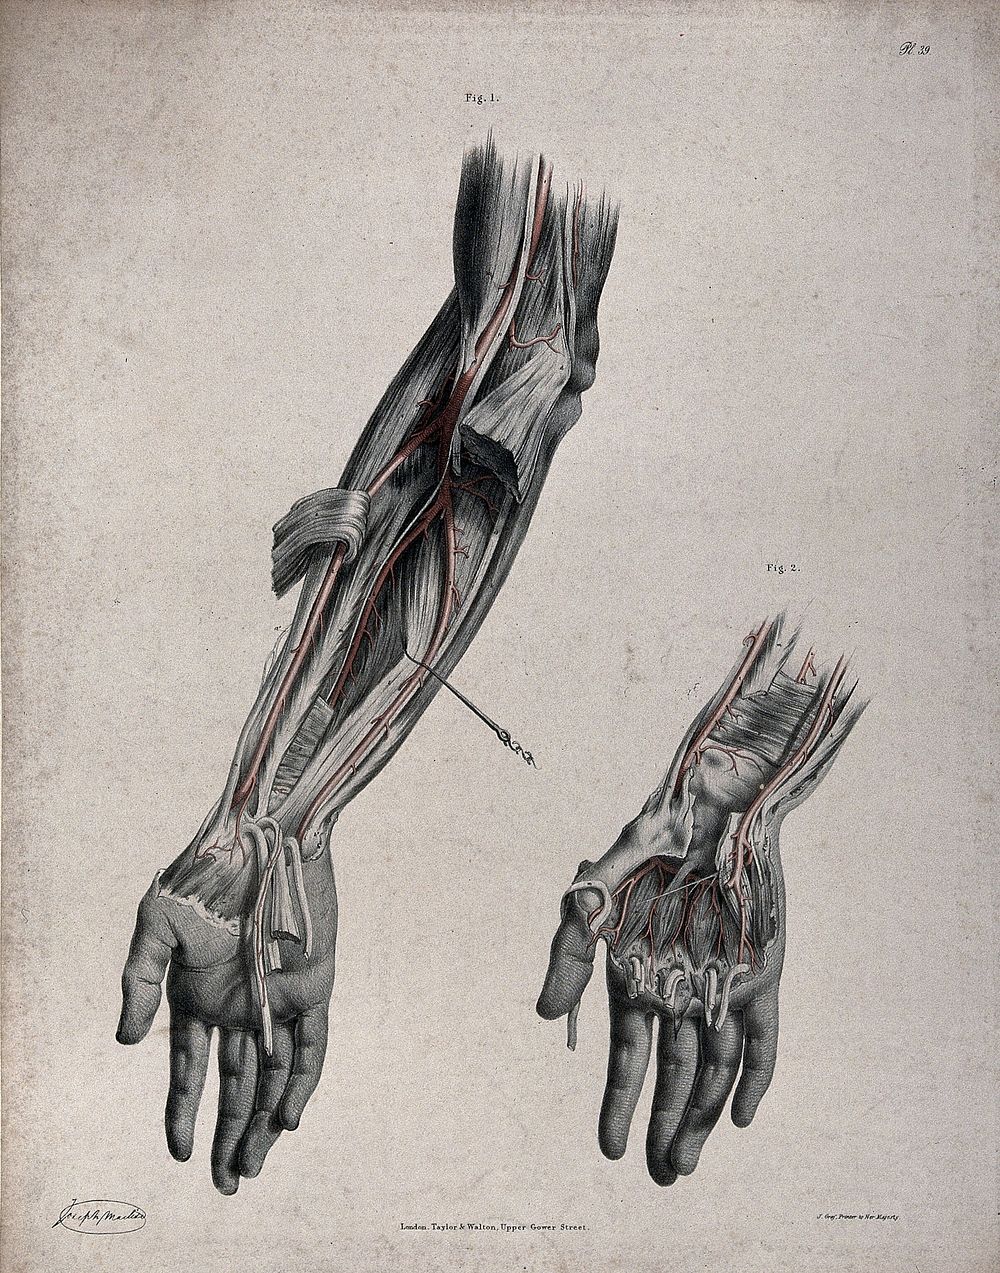 The circulatory system: two dissections of the arm and the hand, with arteries and blood vessels indicated in red. Coloured…